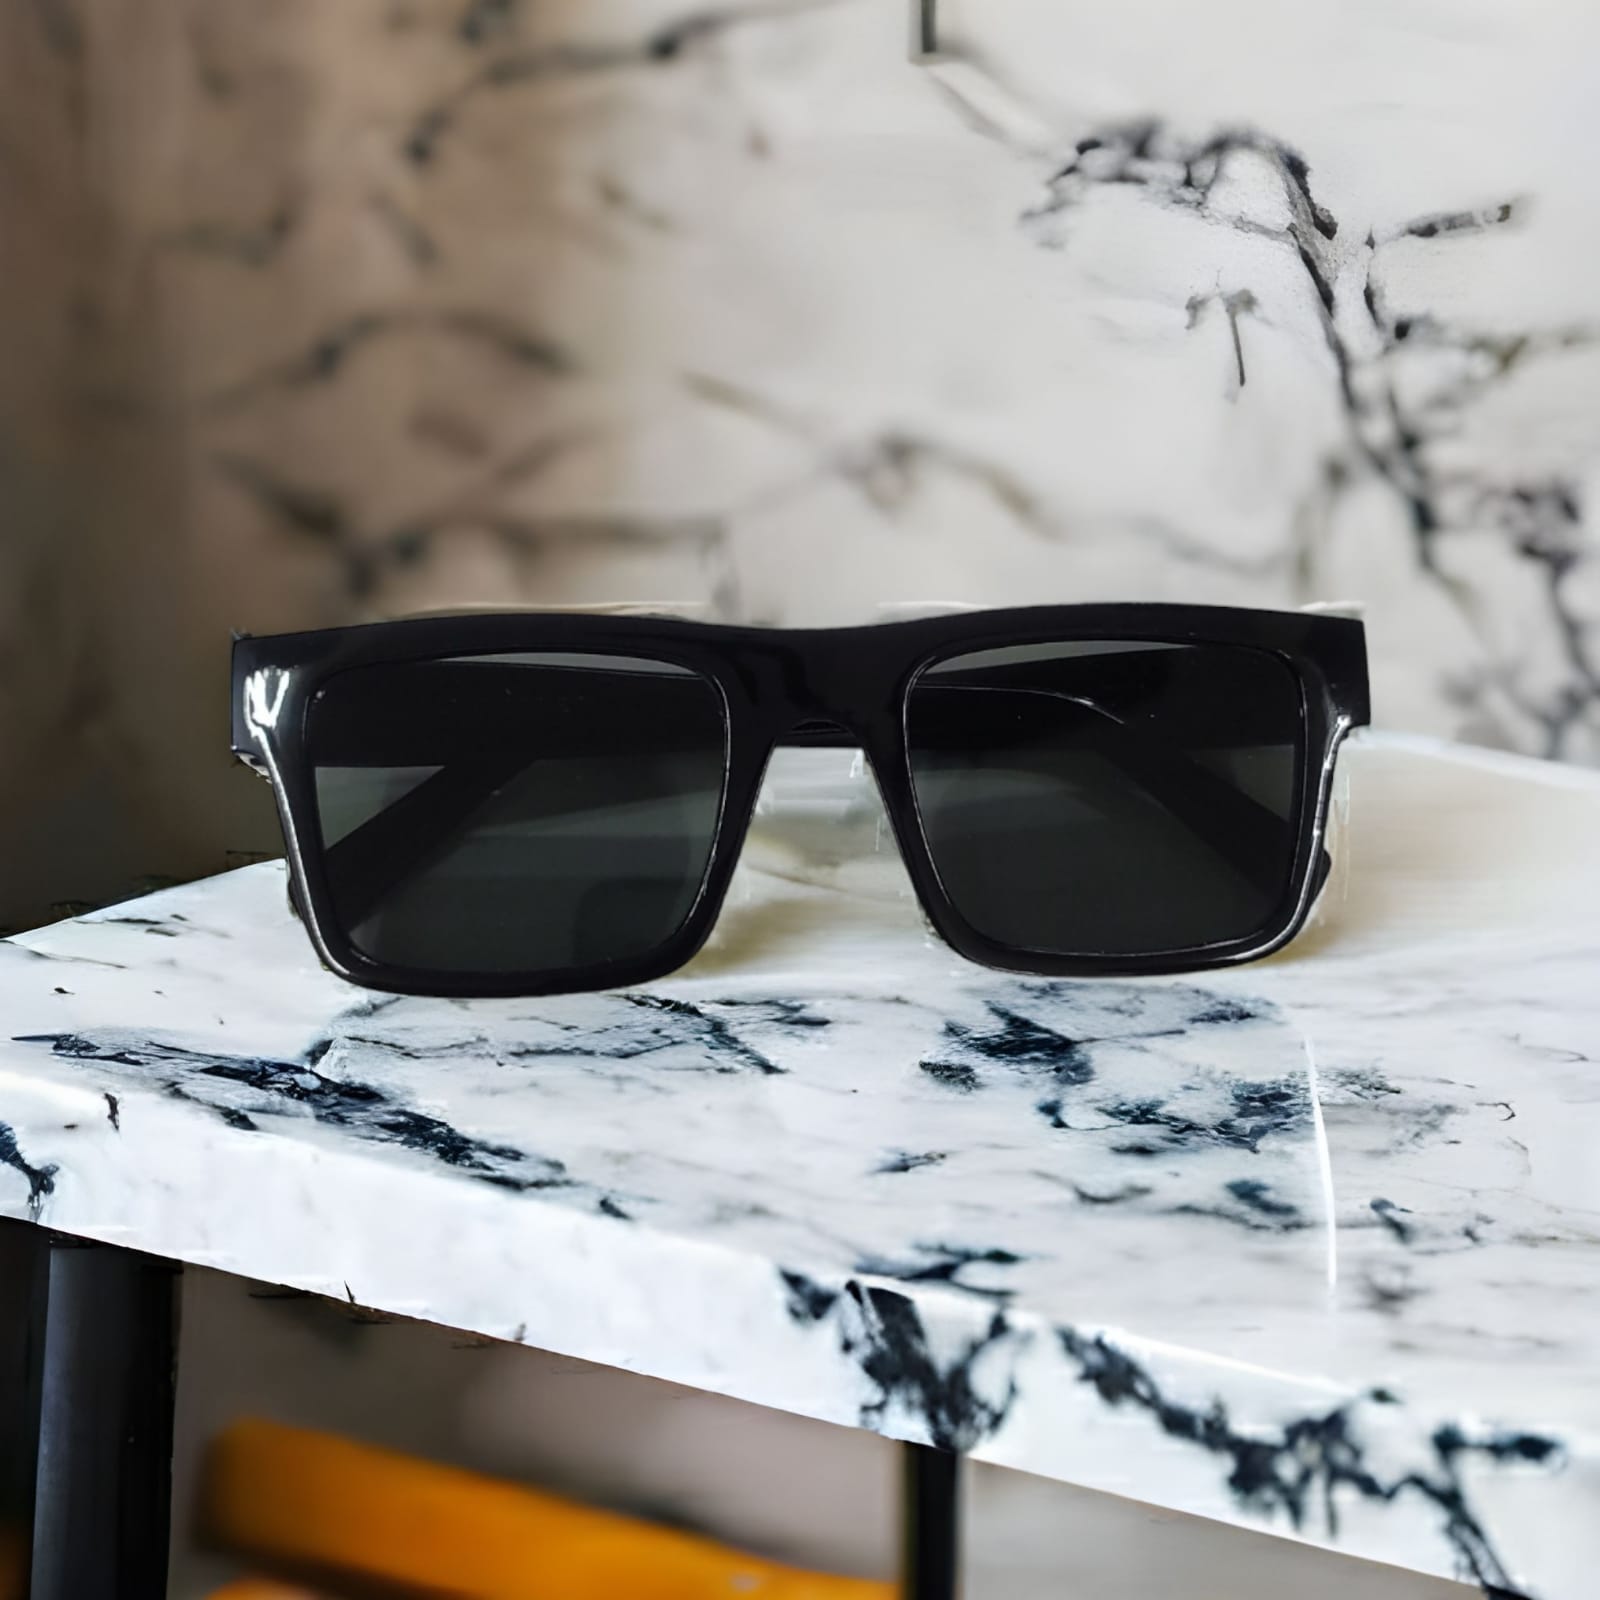 What Are the Best Sunglasses for Under $100 in 2023?